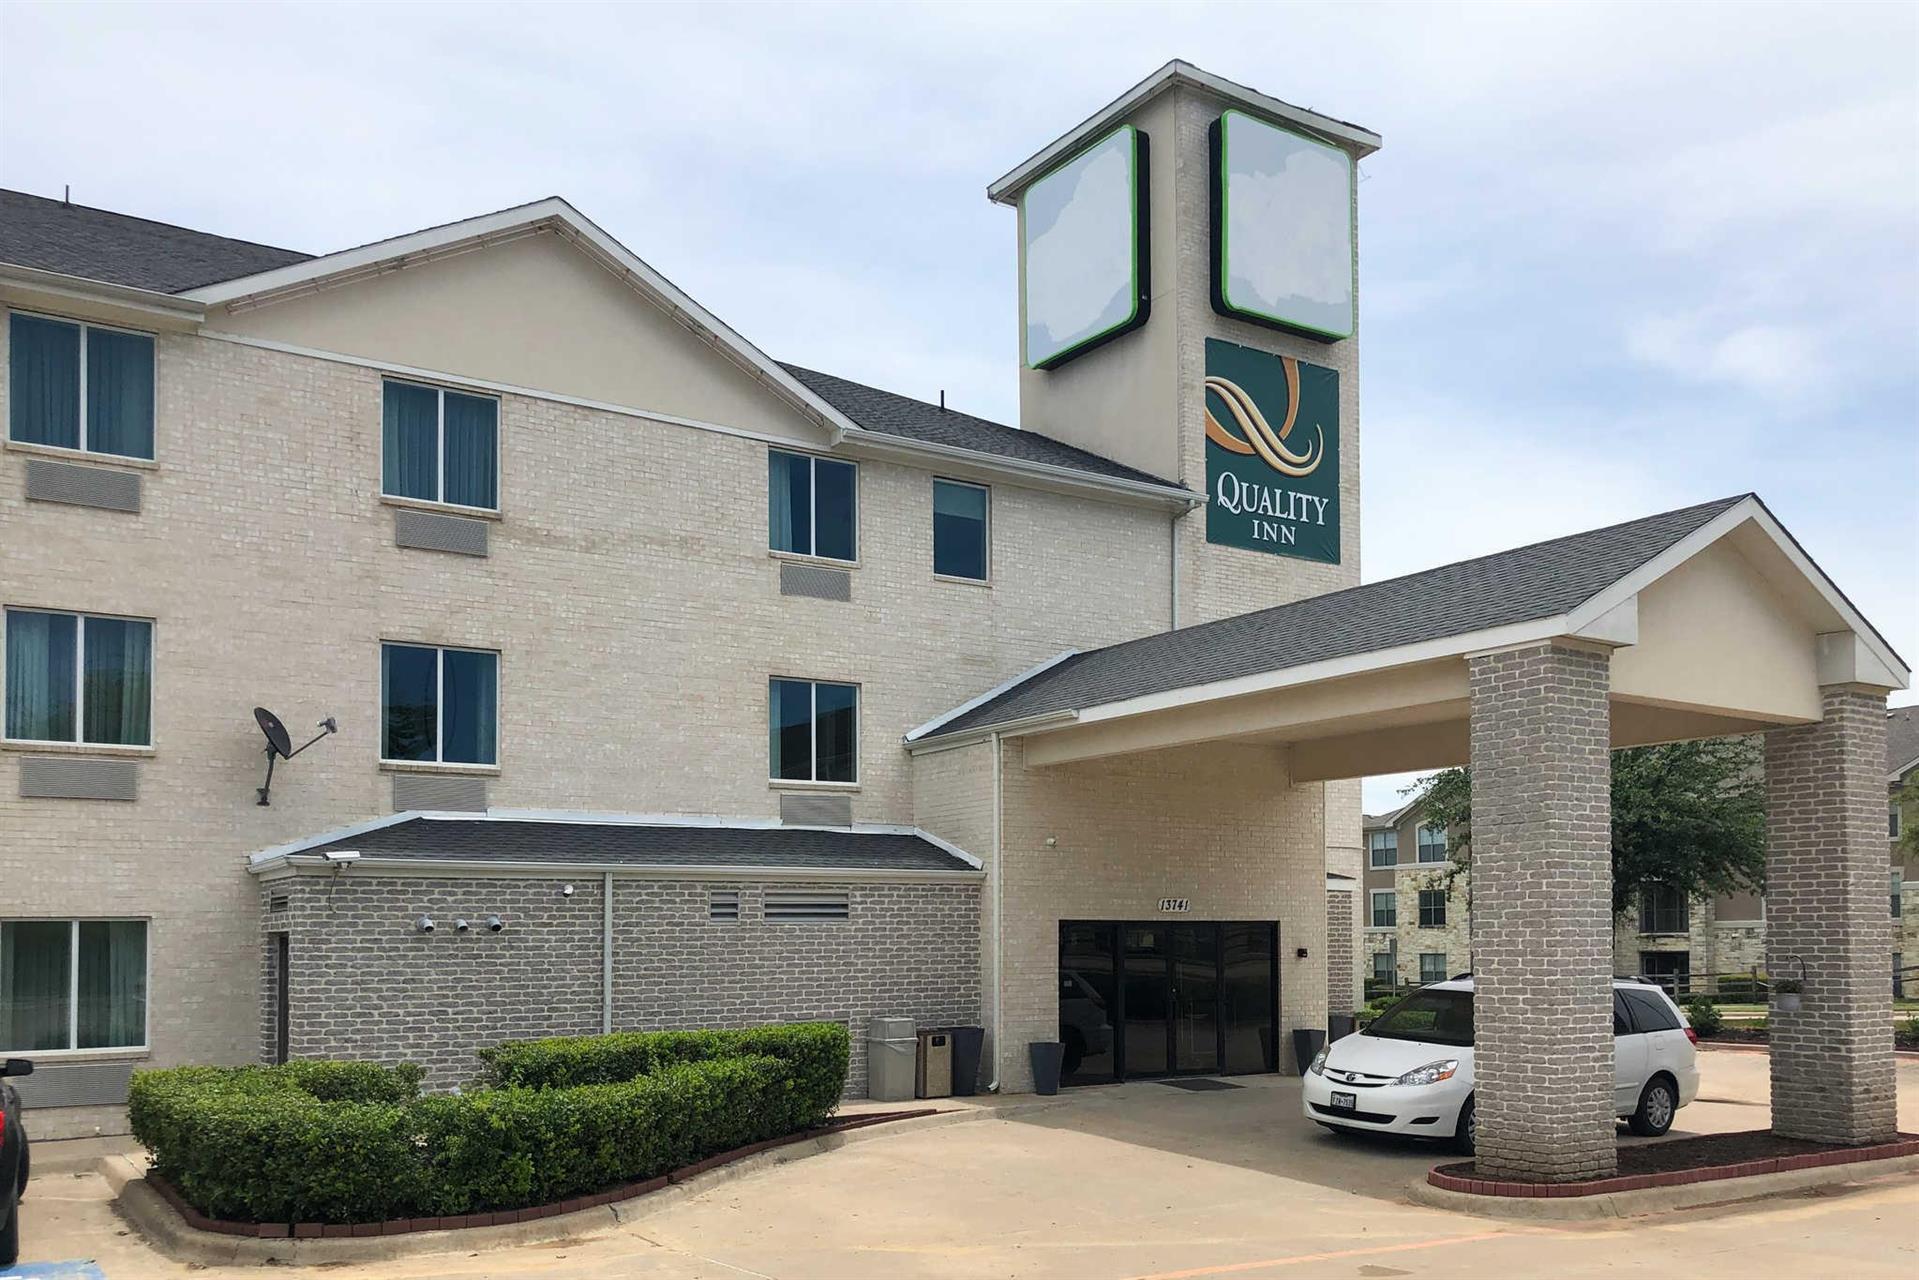 Quality Inn and Suites Roanoke - Fort Worth North in Roanoke, TX